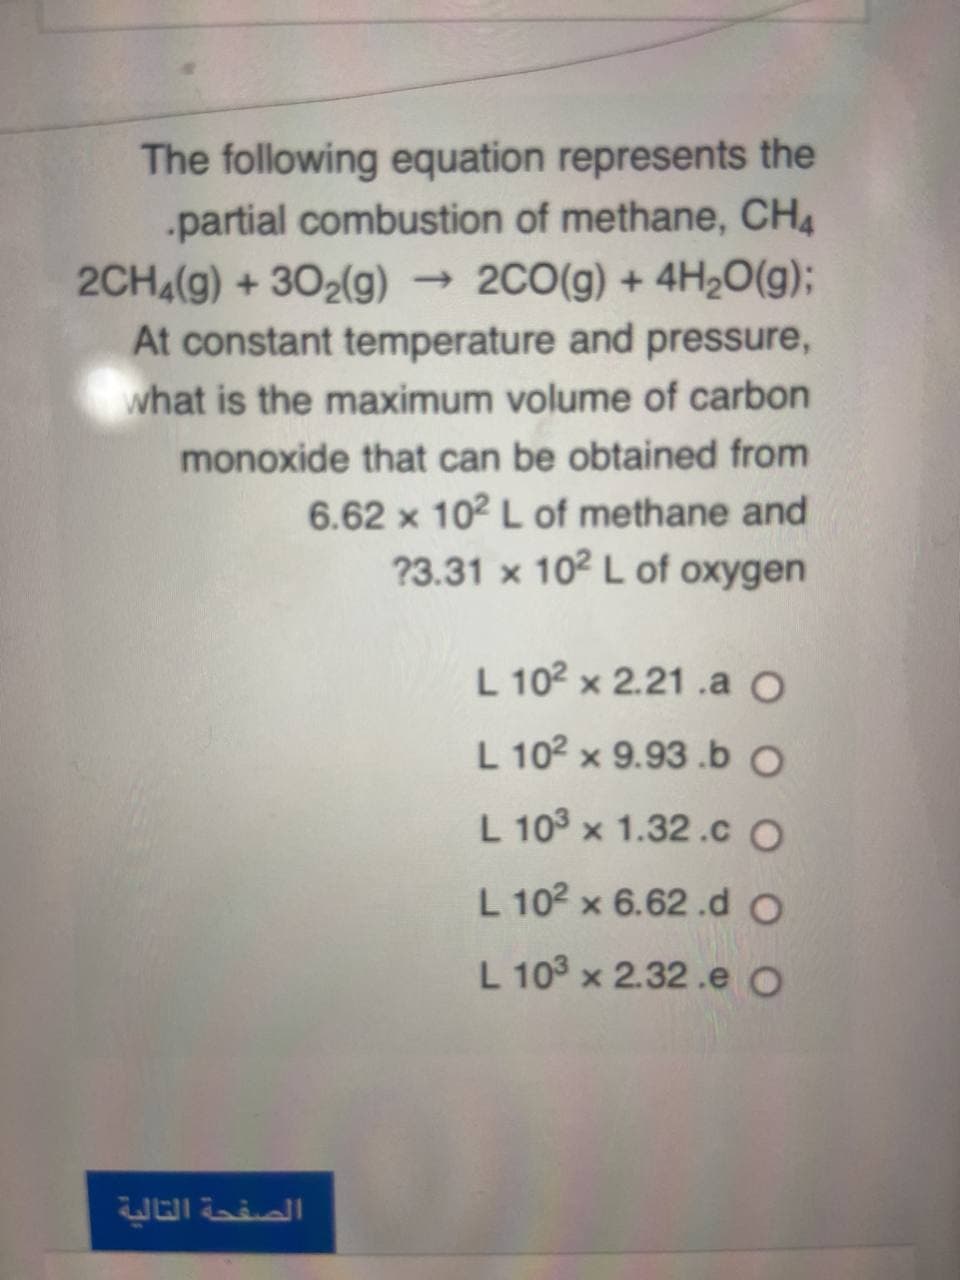 The following equation represents the
.partial combustion of methane, CH4
2CH4(g) + 302(g) 2C0(g) + 4H2O(g);
At constant temperature and pressure,
what is the maximum volume of carbon
monoxide that can be obtained from
6.62 x 102 L of methane and
?3.31 x 102 L of oxygen
L 102 x 2.21 .a O
L 102 x 9.93 .b O
L 103 x 1.32.C O
L 102 x 6.62 .d O
L 10° x 2.32.e O
الصفحة التالية
